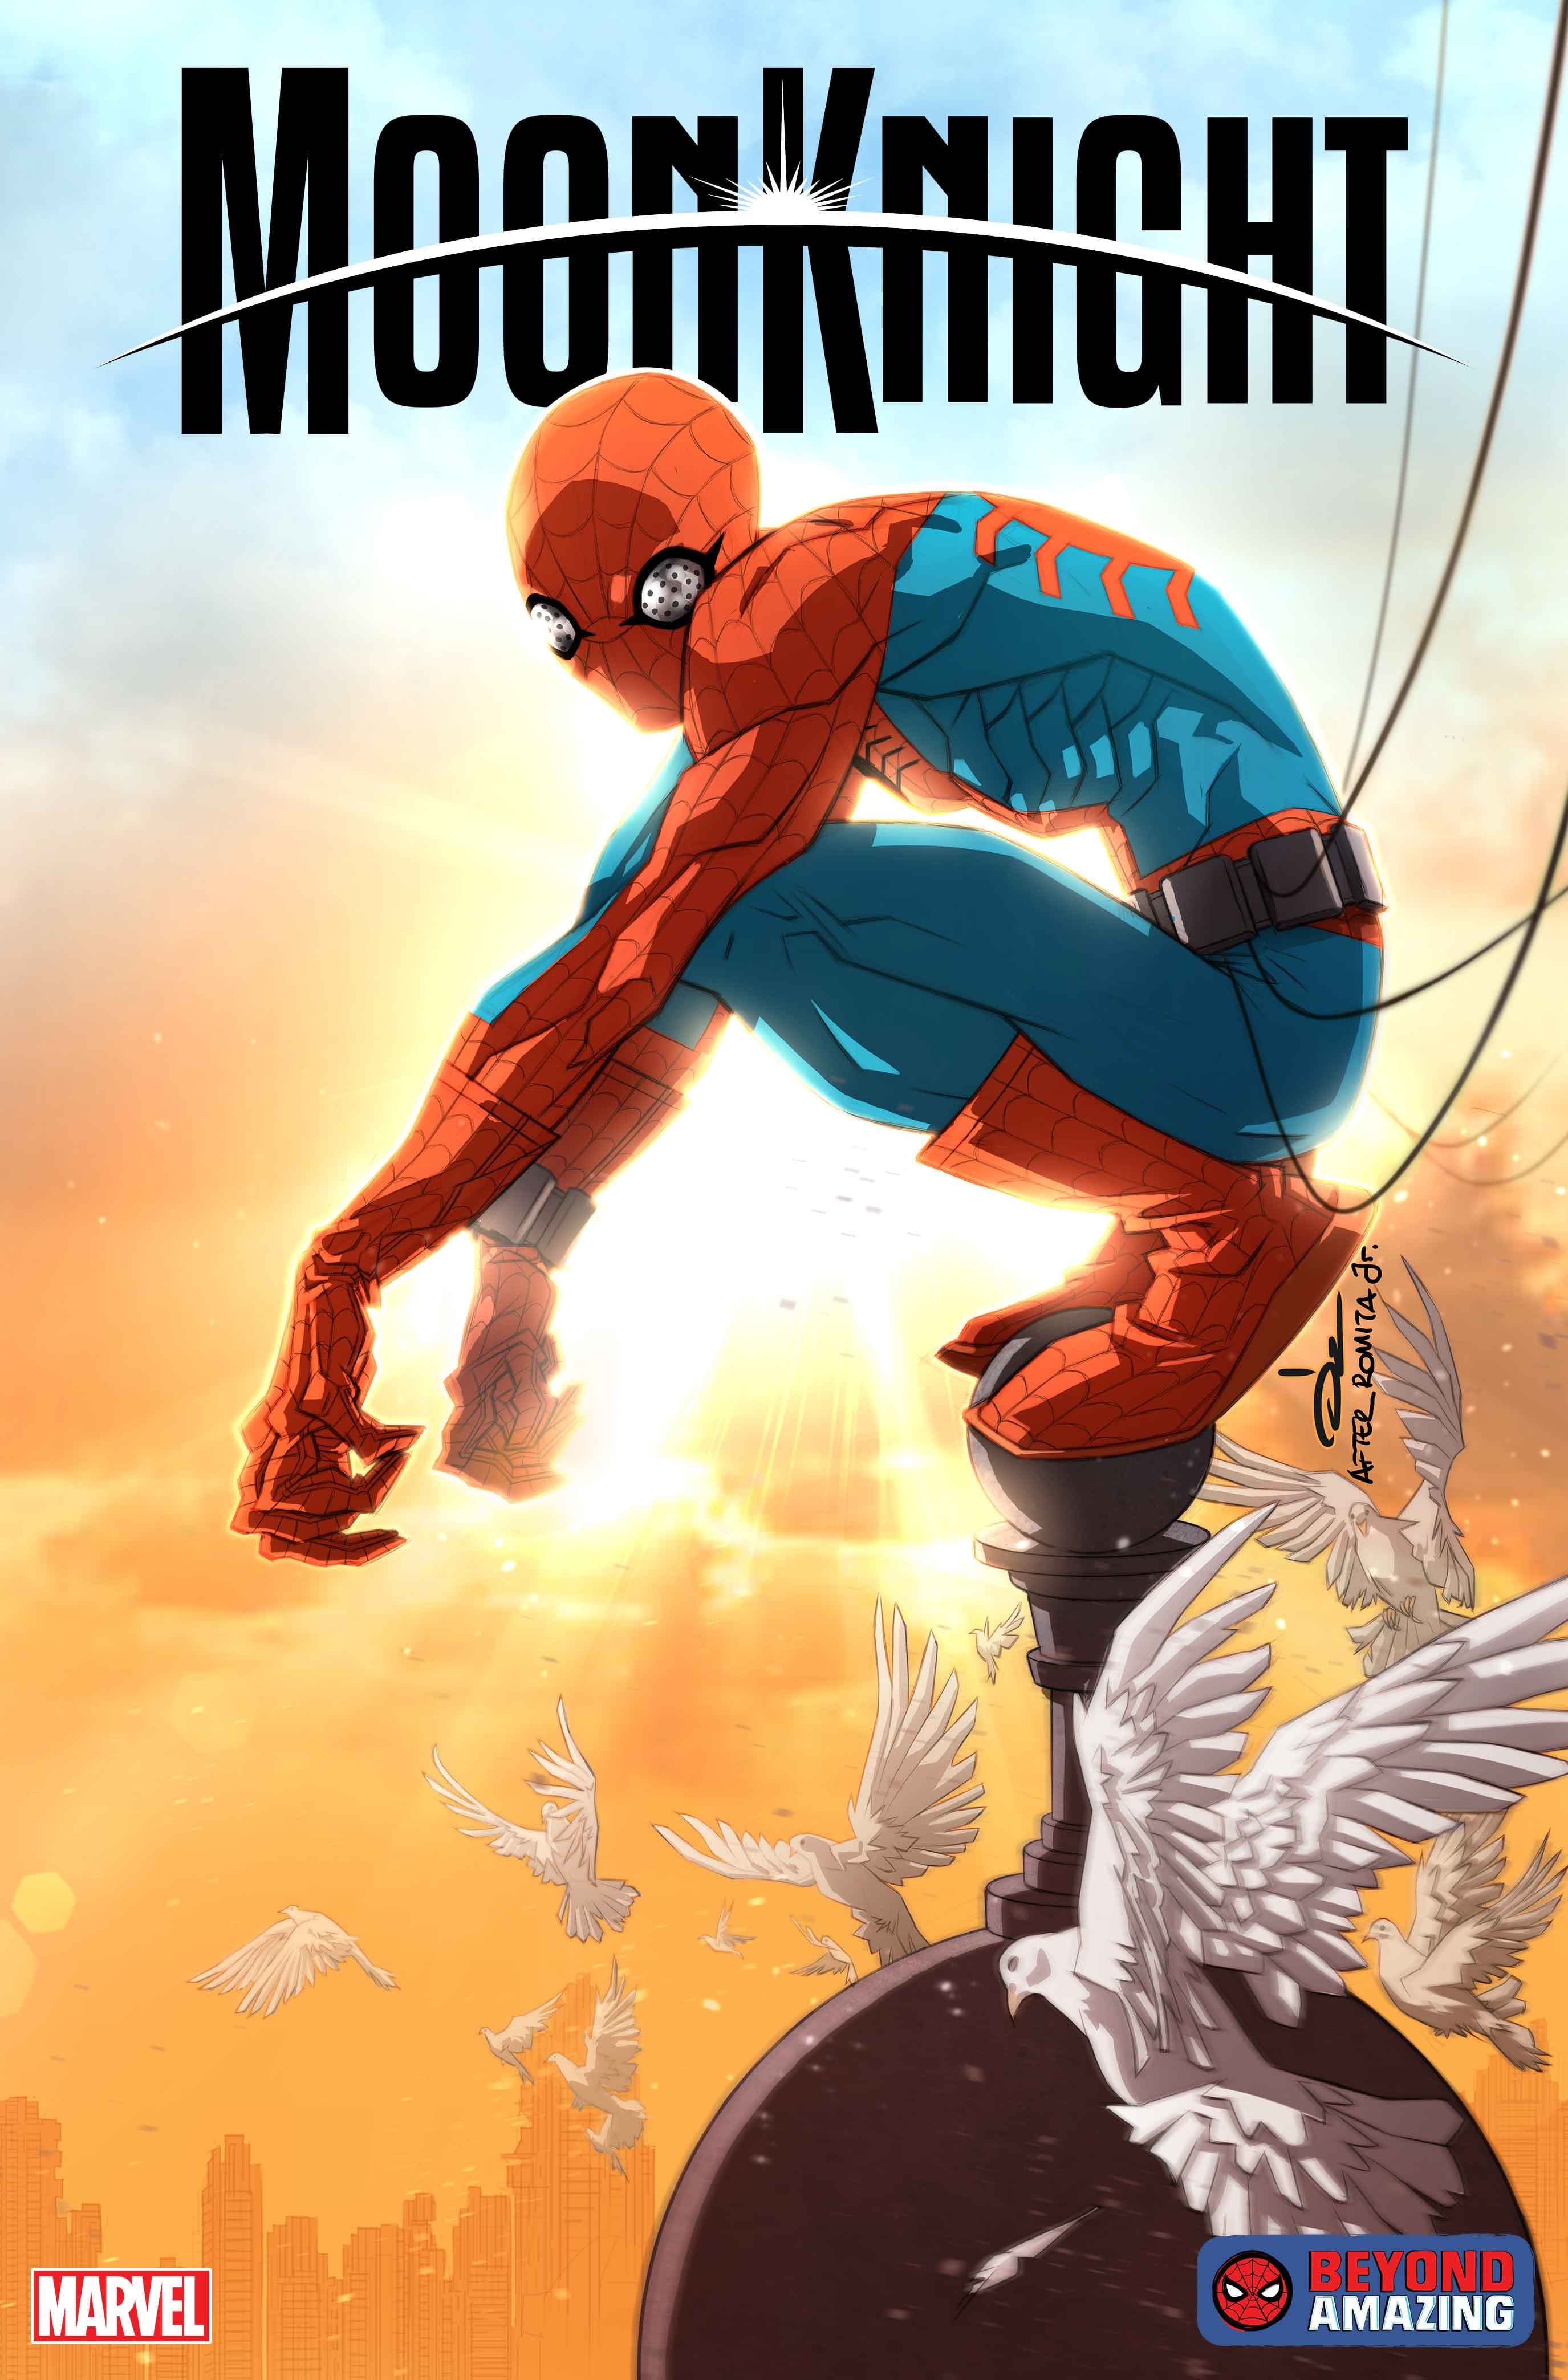 Details about   THE AMAZING SPIDER-MAN #25 9.6-9.8 LGY #826/Variant Cover/Marvel Comics 